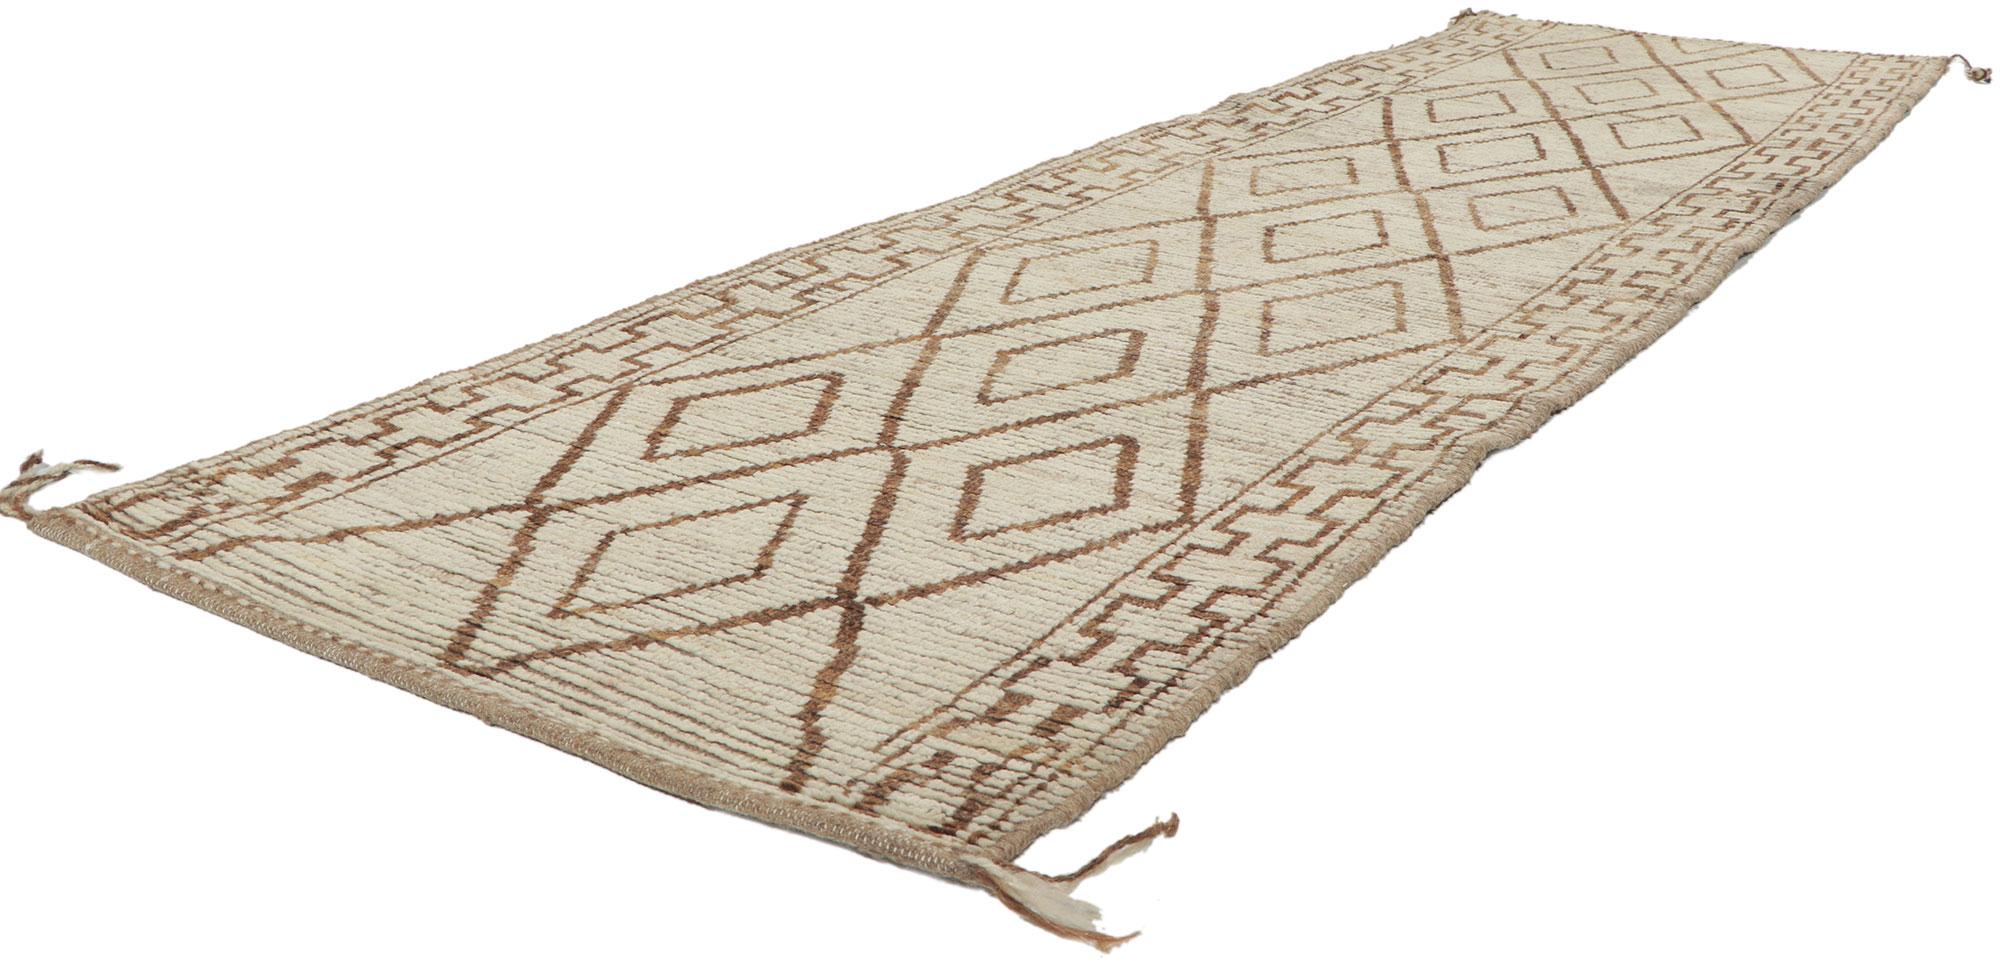 ?80768 new Contemporary Moroccan Style Runner with short pile, 02'10 x 09'09. With its subtle graphic appeal, incredible detail and texture, this hand knotted wool contemporary Moroccan runner is a captivating vision of woven beauty. The tribal